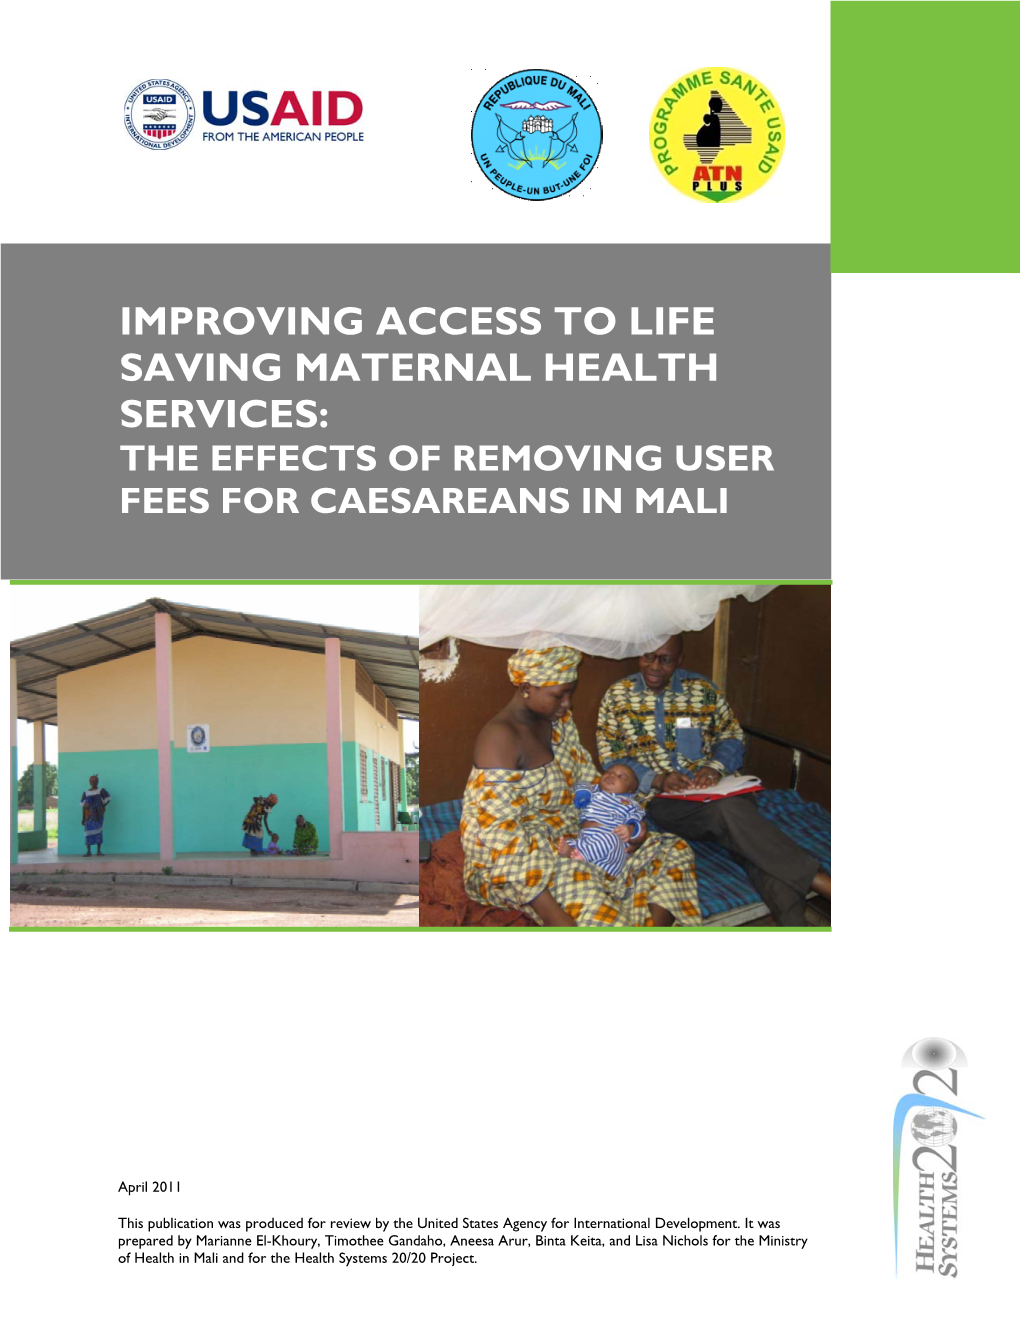 Improving Access to Life Saving Maternal Health Services: the Effects of Removing User Fees for Caesareans in Mali